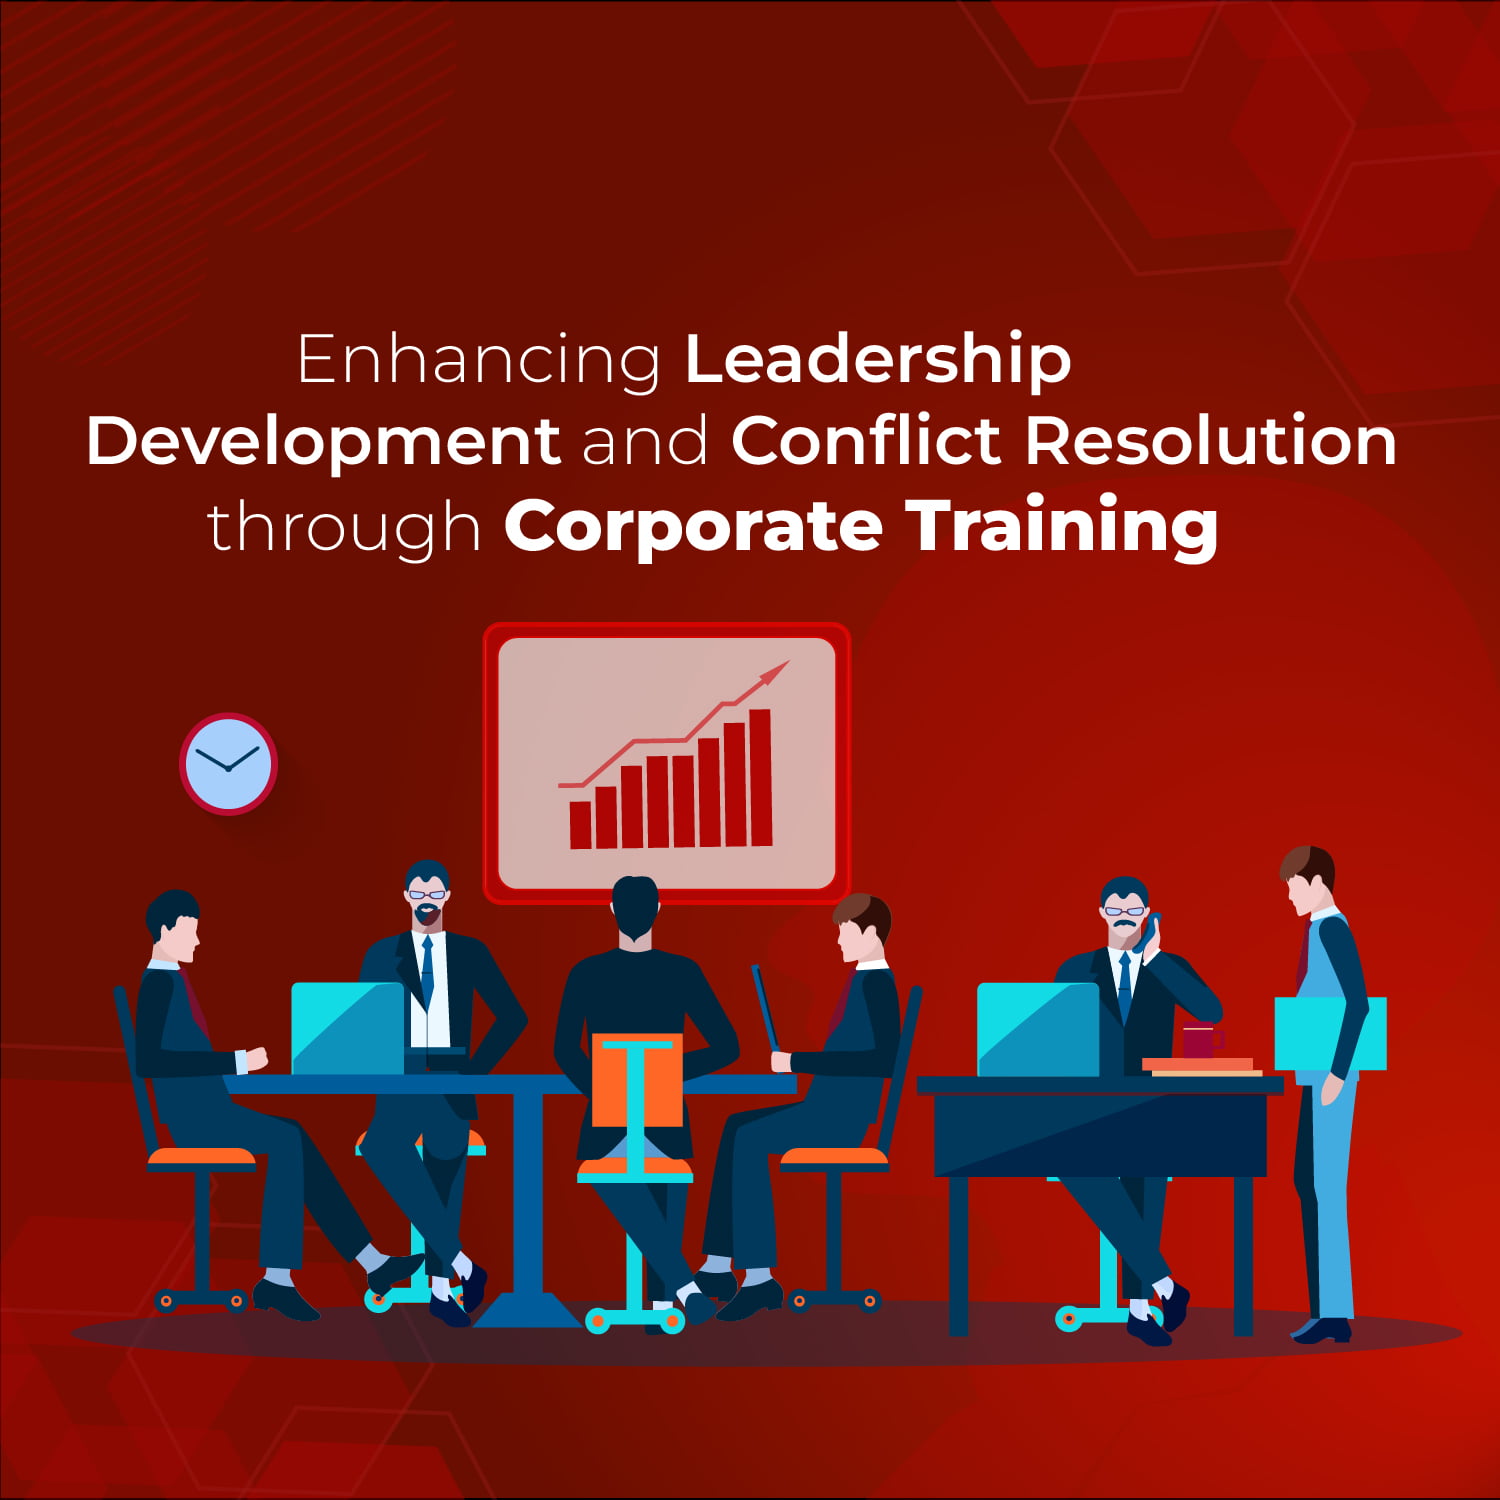 Enhancing Leadership Development and Conflict Resolution through Corporate Training